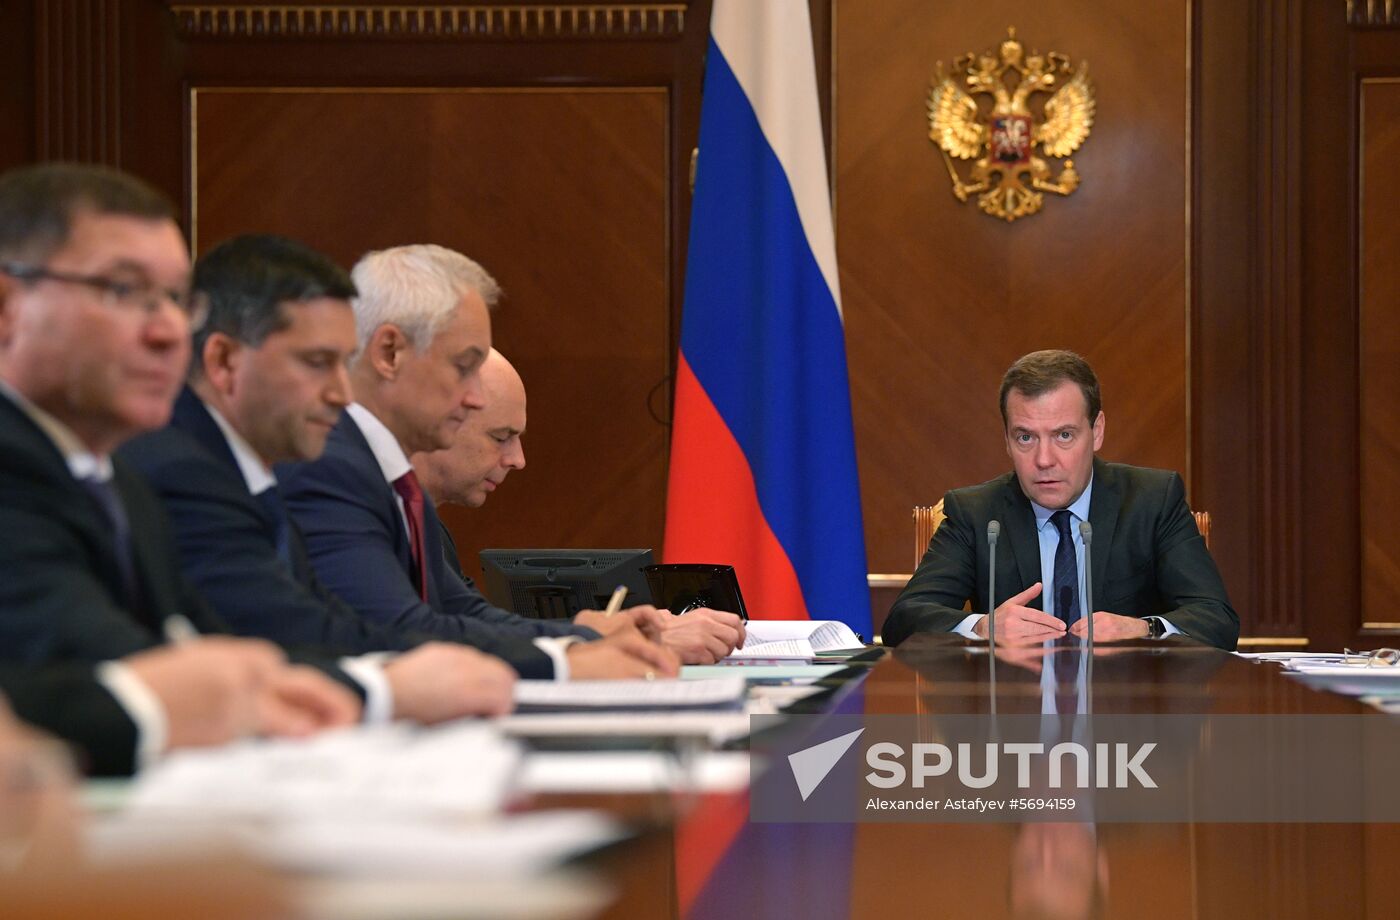 Prime Minister Dmitry Medvedev chairs meeting on agriculture development